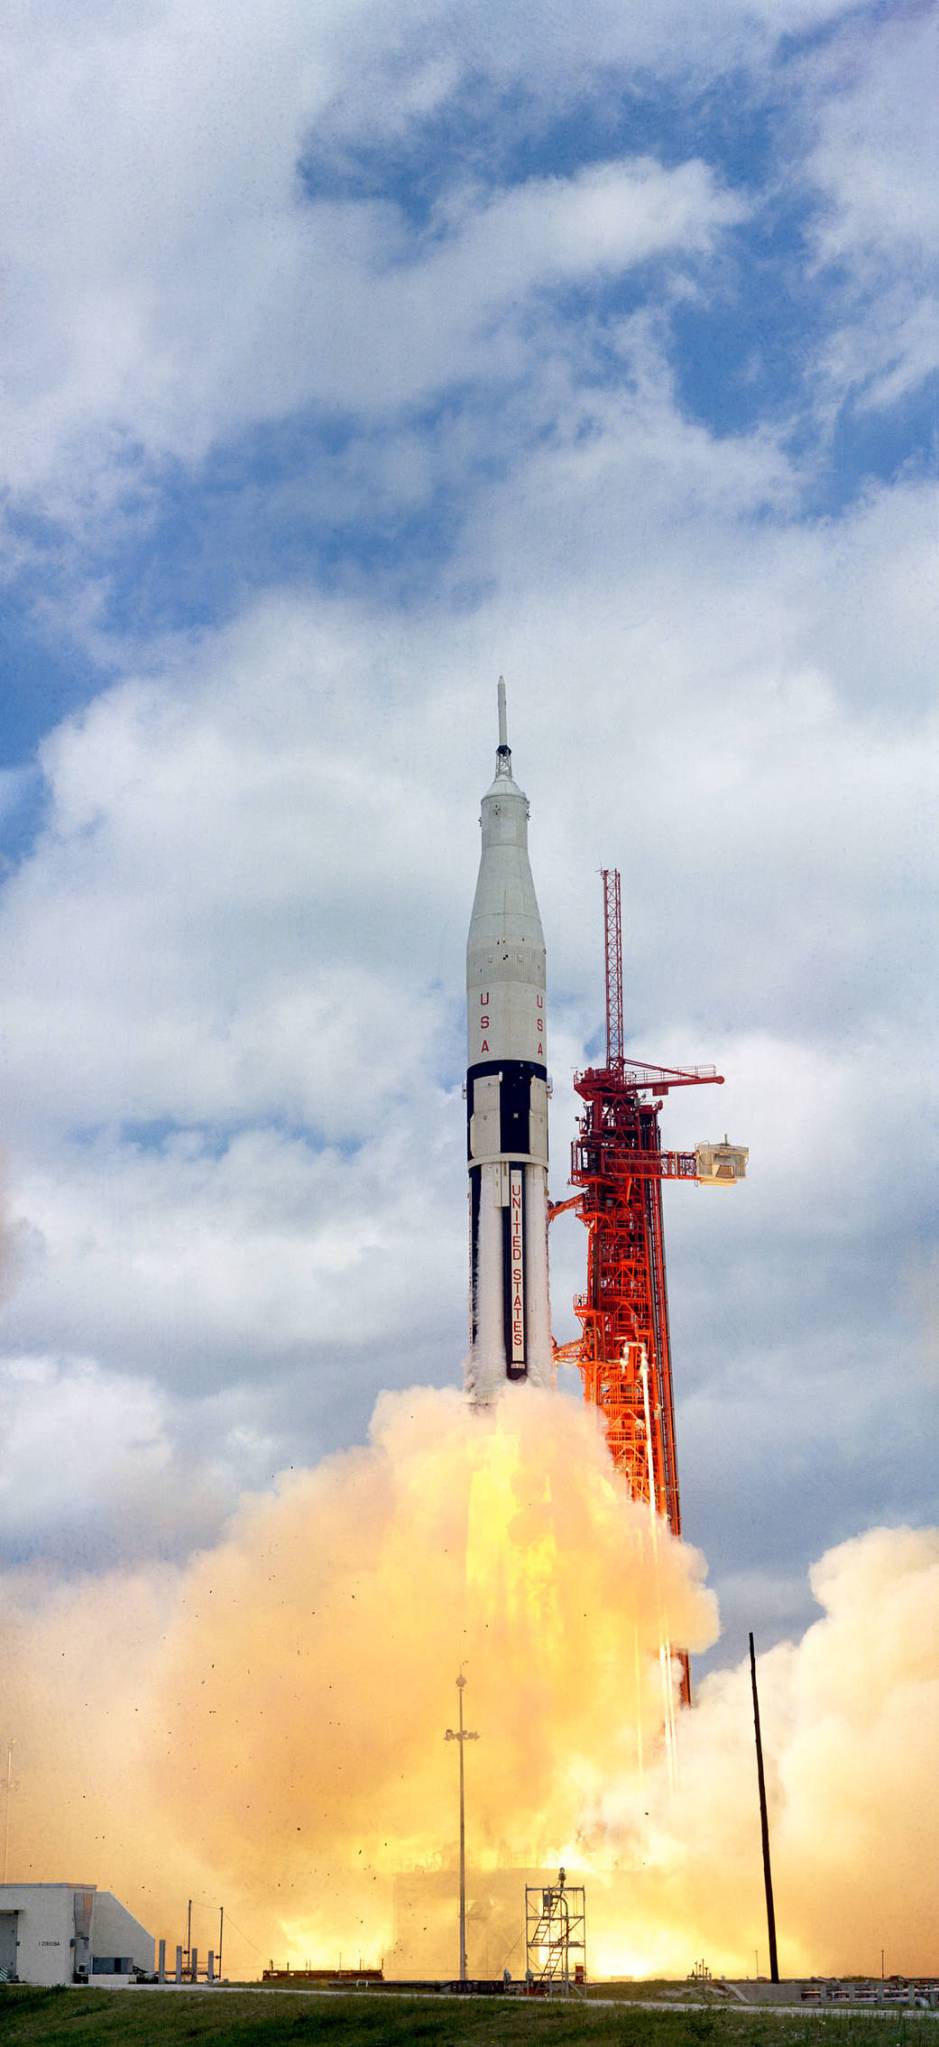 AS-202 launches from Cape Canaveral, Florida.